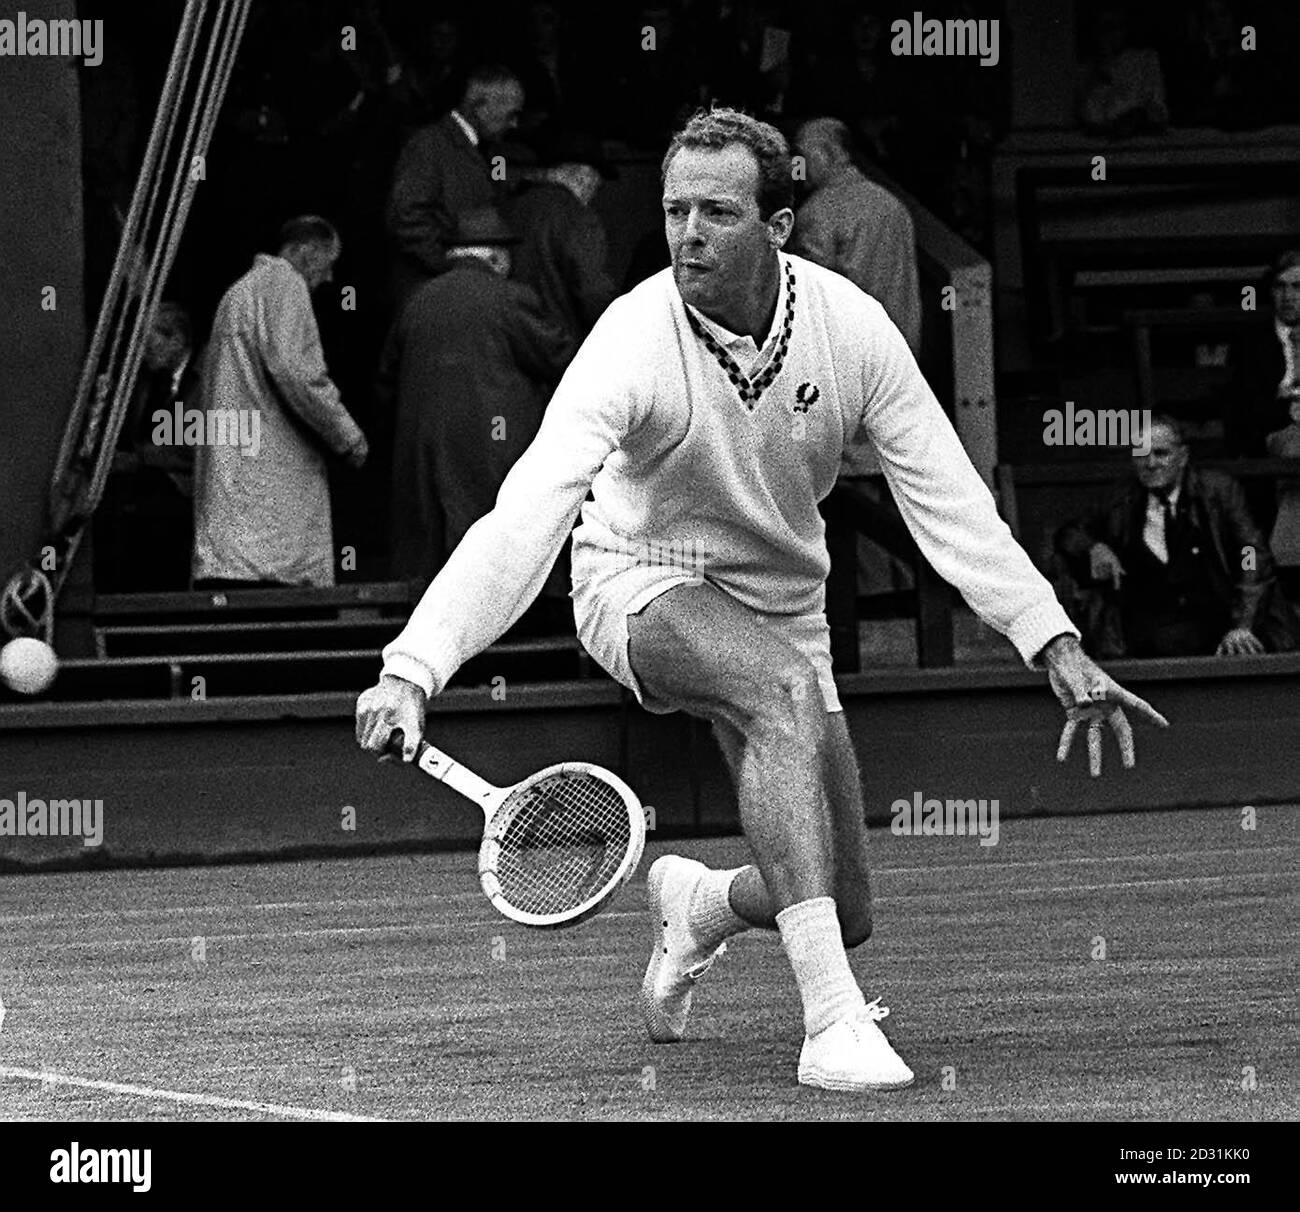 FRED STOLLE 1968: Fred Stolle, Australia, grimaces as he plays against the  Frenchman J.C. Barclay in the men's singles at Wimbledon. Stolle won 6-1,  6-2, 6-2 Stock Photo - Alamy